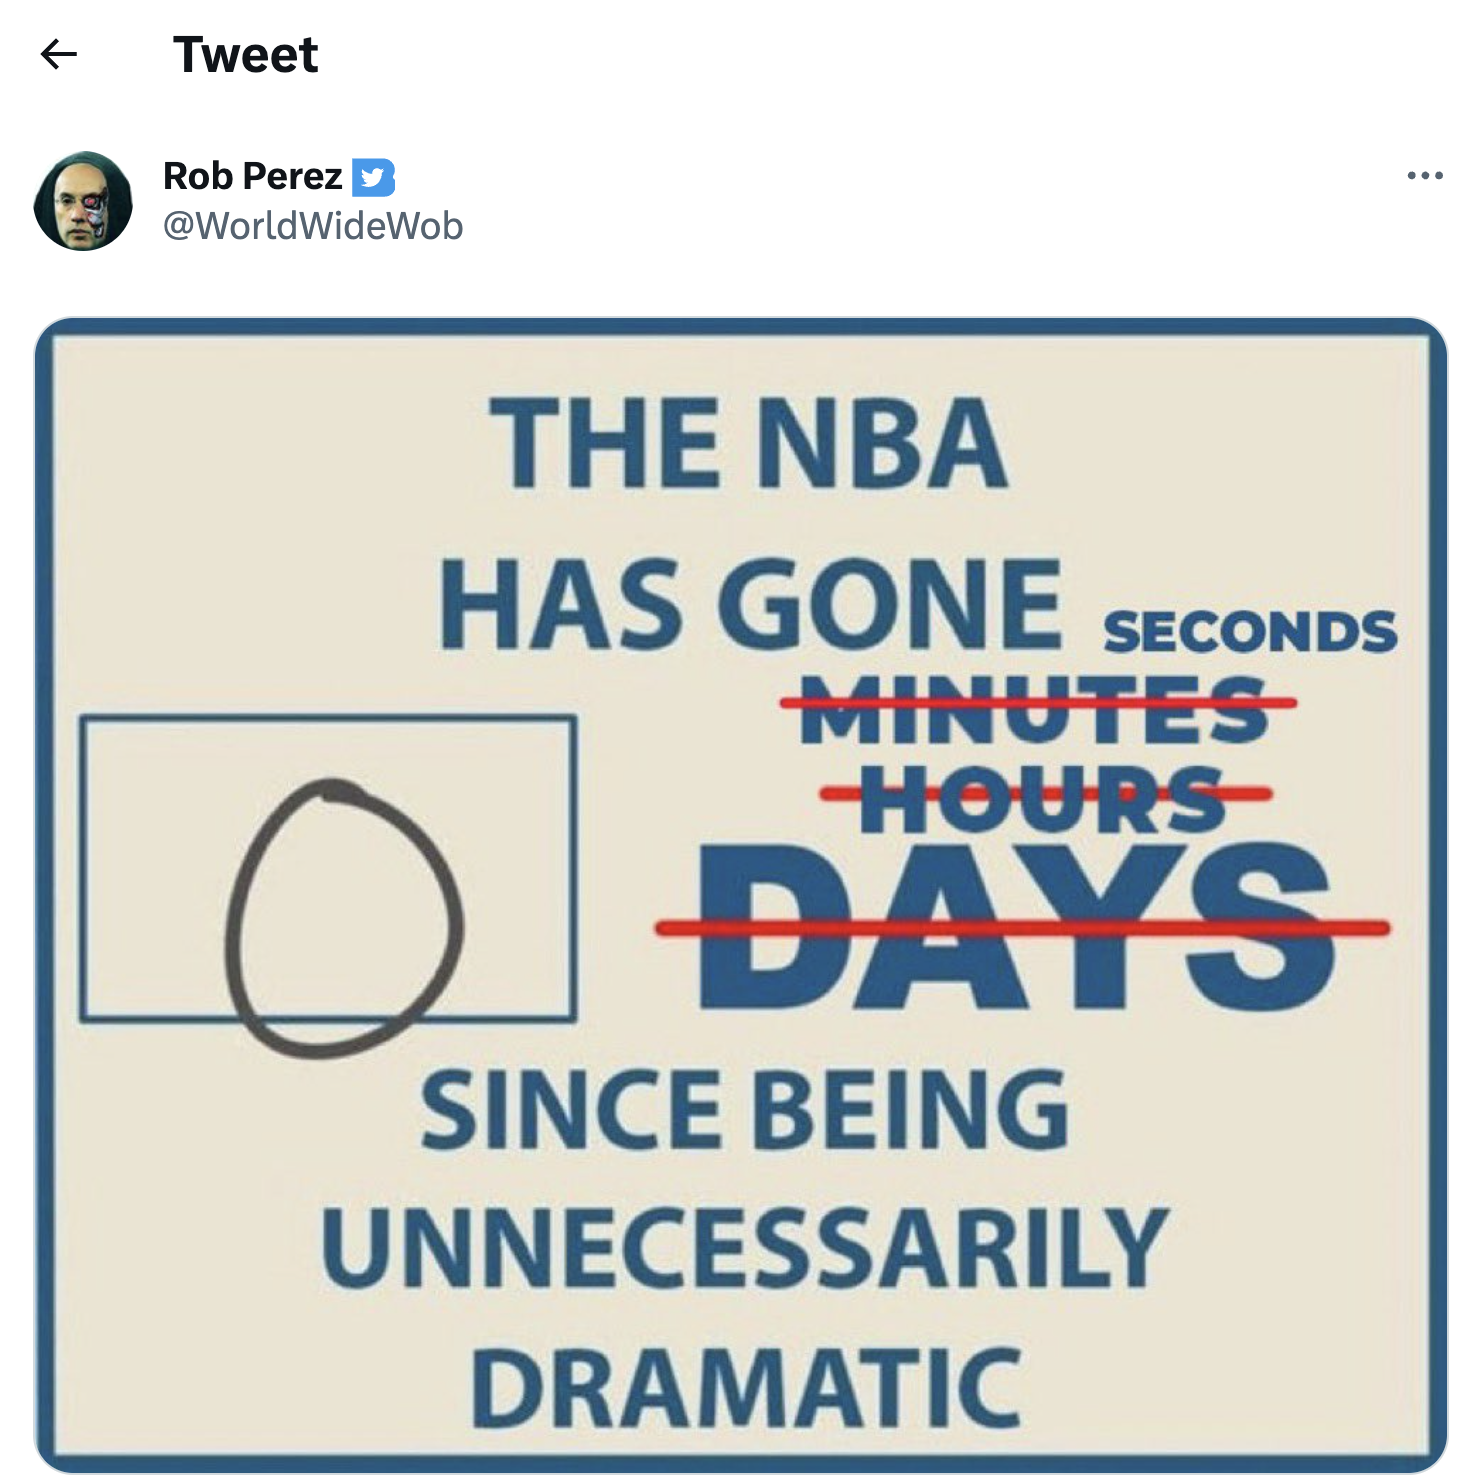 BALLS.394 The NBA has gone 0 days since being unnecessarily dramatic